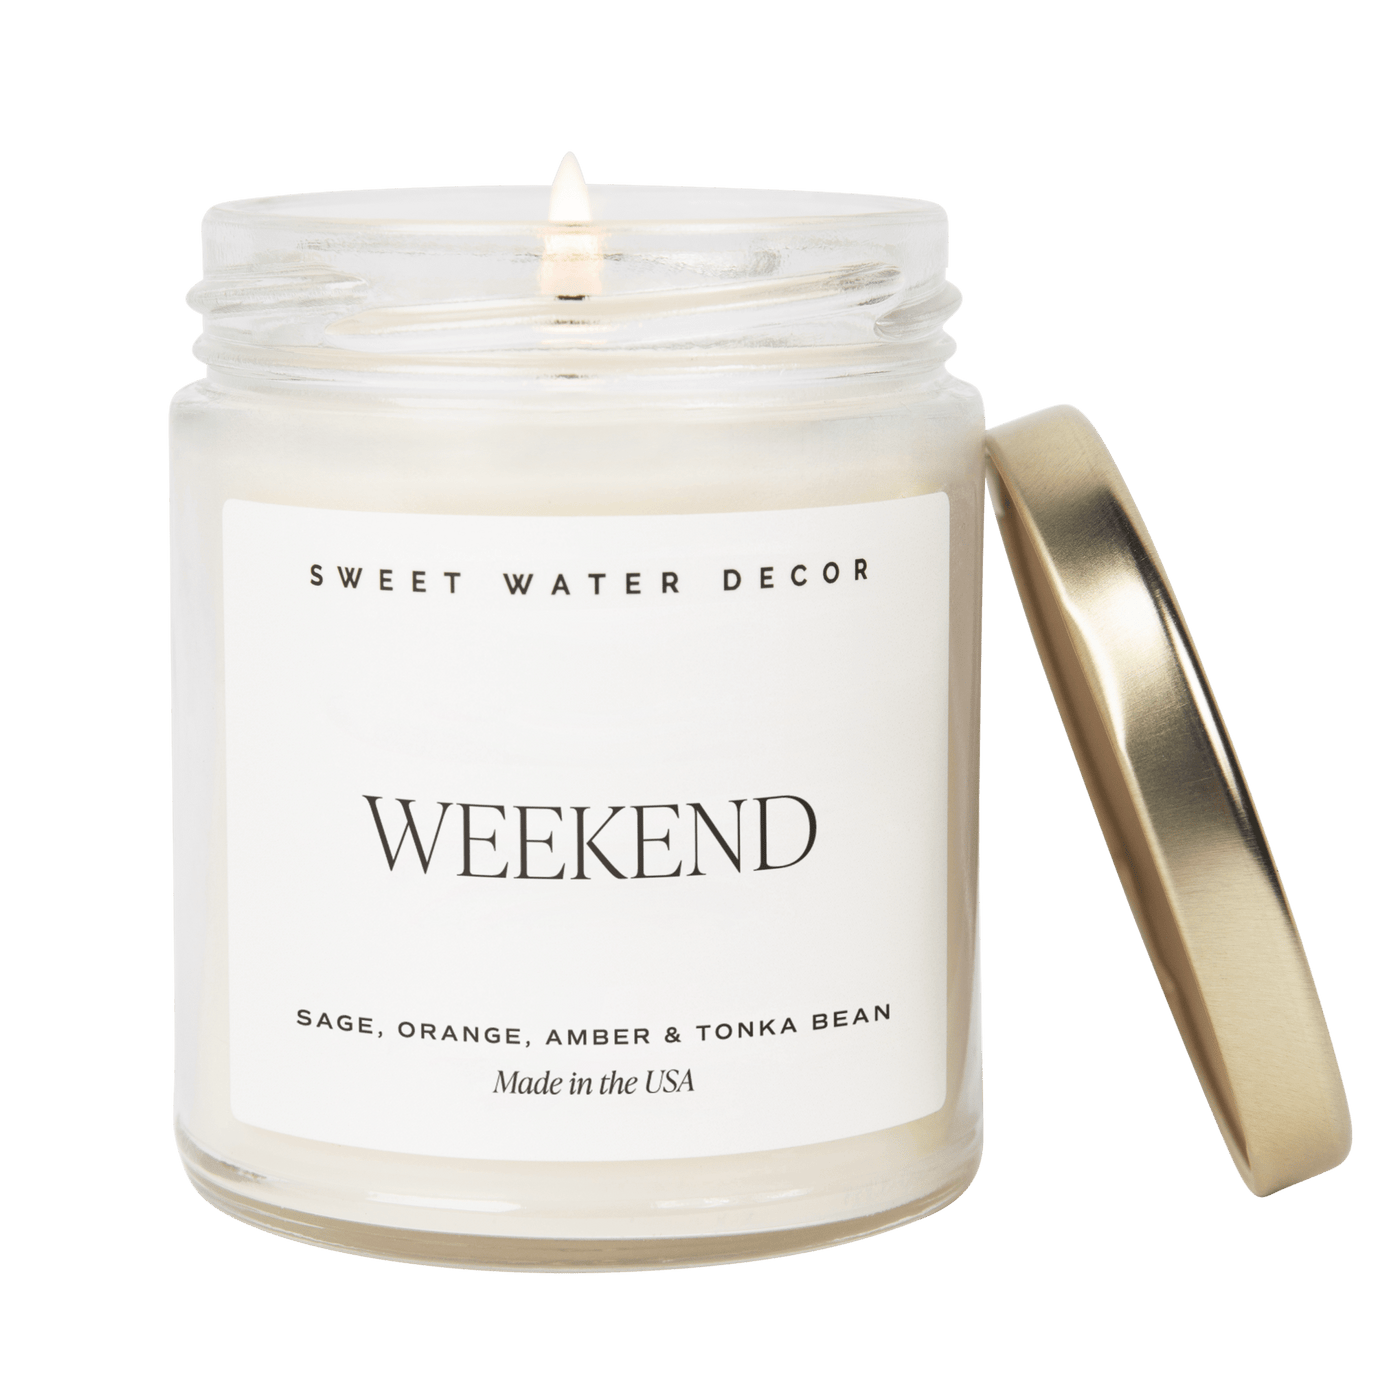 Weekend Soy Candle - Clear Jar - 9 oz - Sweet Water Decor - Candles